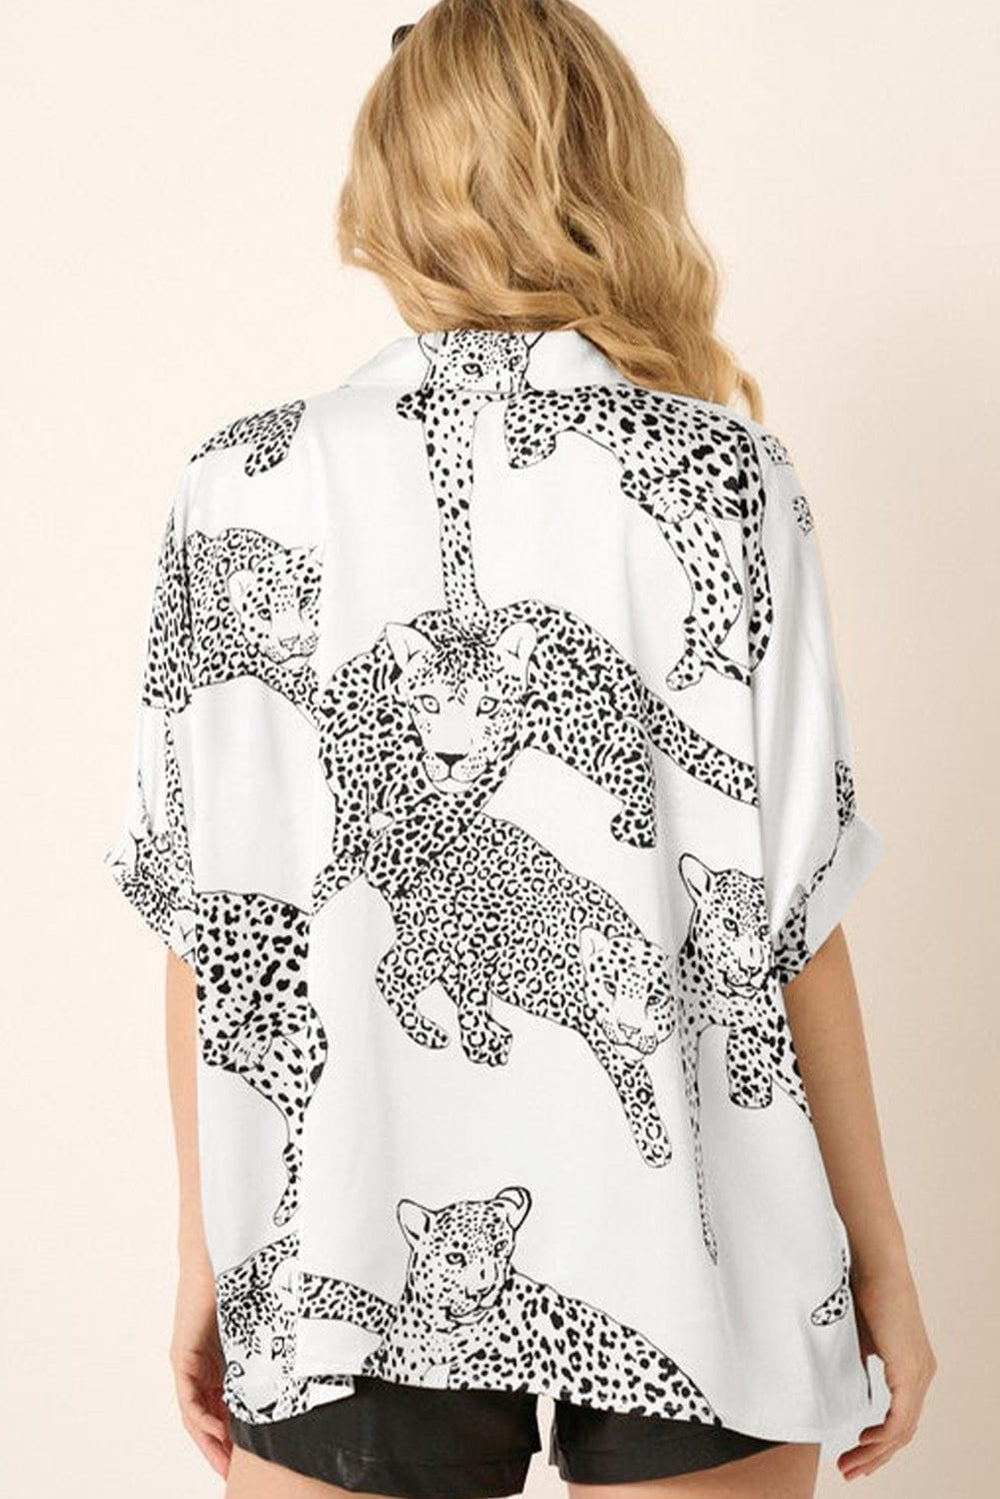 The802Gypsy  Women's Tops Traveling Gypsy  Cheetah Print Buttoned Shirt